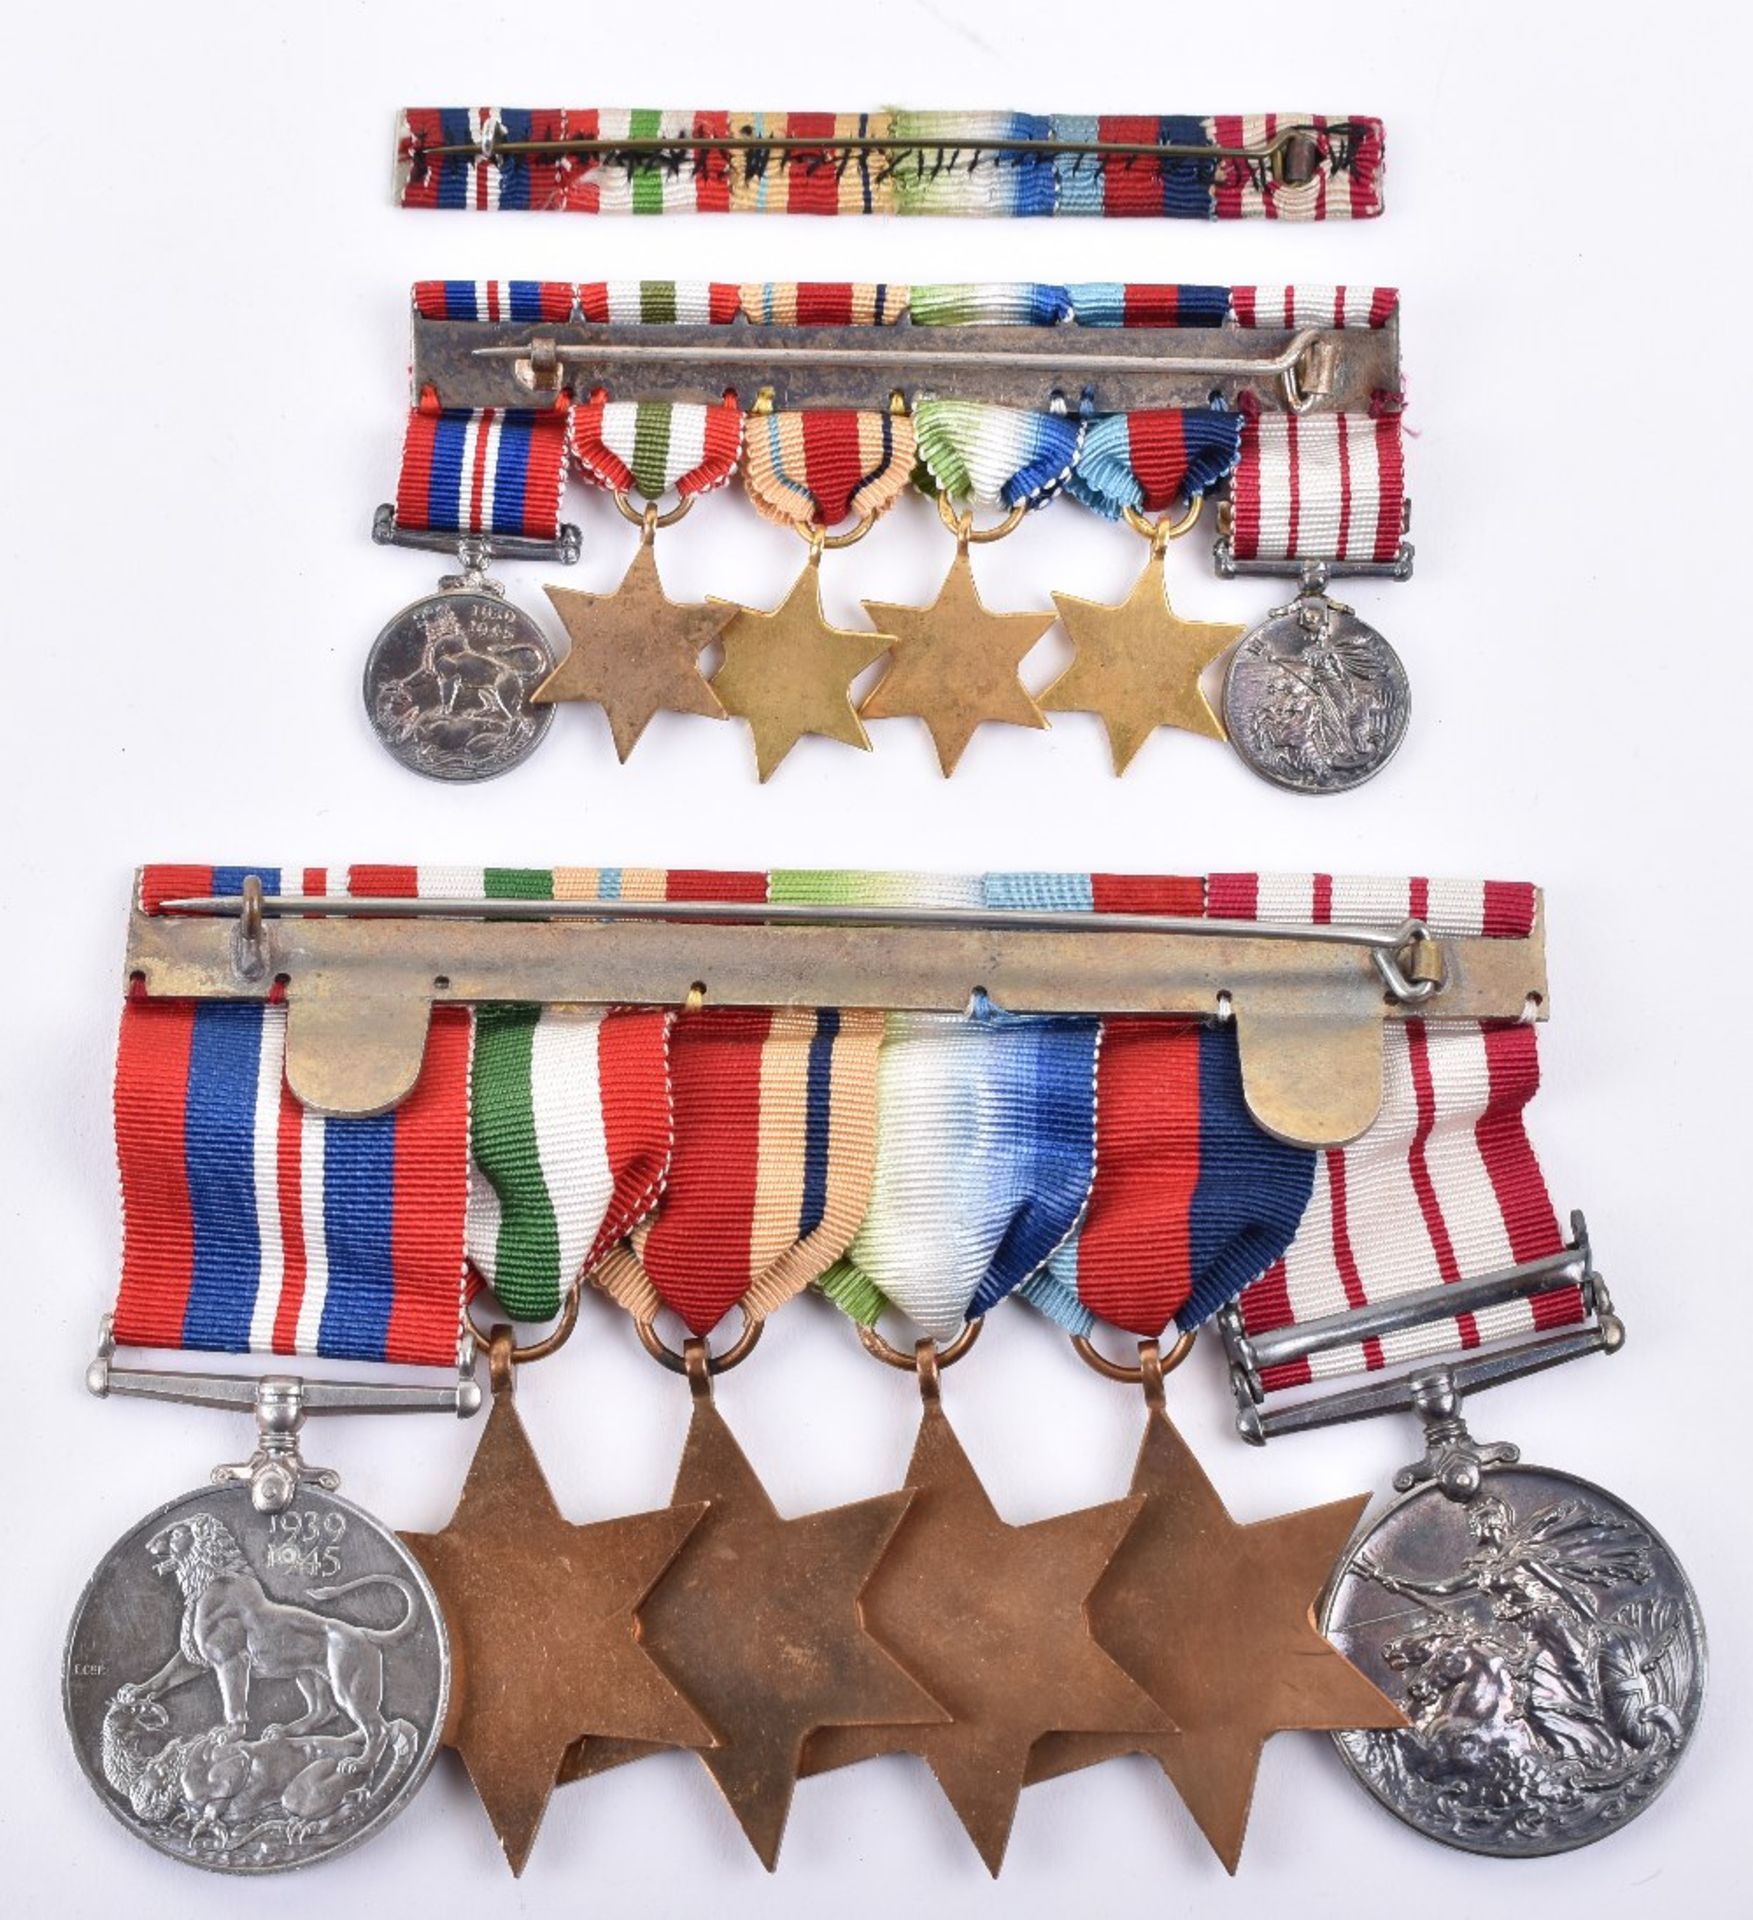 Palestine and WW2 Royal Navy Medal Group of Six Awarded to Lieutenant L W C Burch Royal Navy - Image 3 of 5